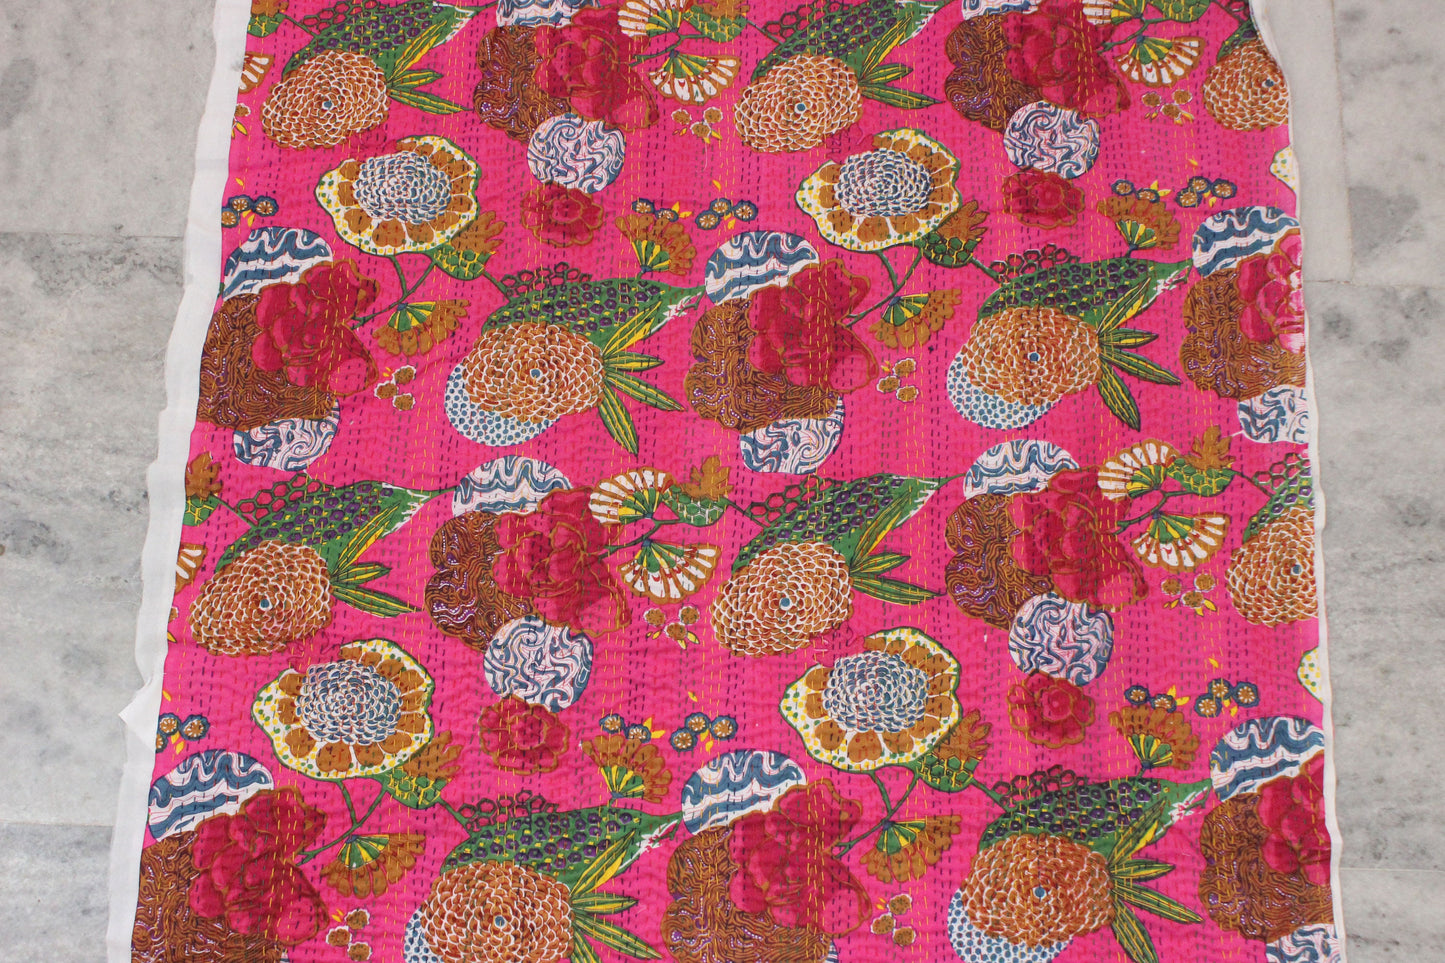 Pink Bohemian Fabric By The Yard Floral Indian Textile Fabric Embellished Indian Fabric Embroidered Printed Sewing Project Kantha Fabrics